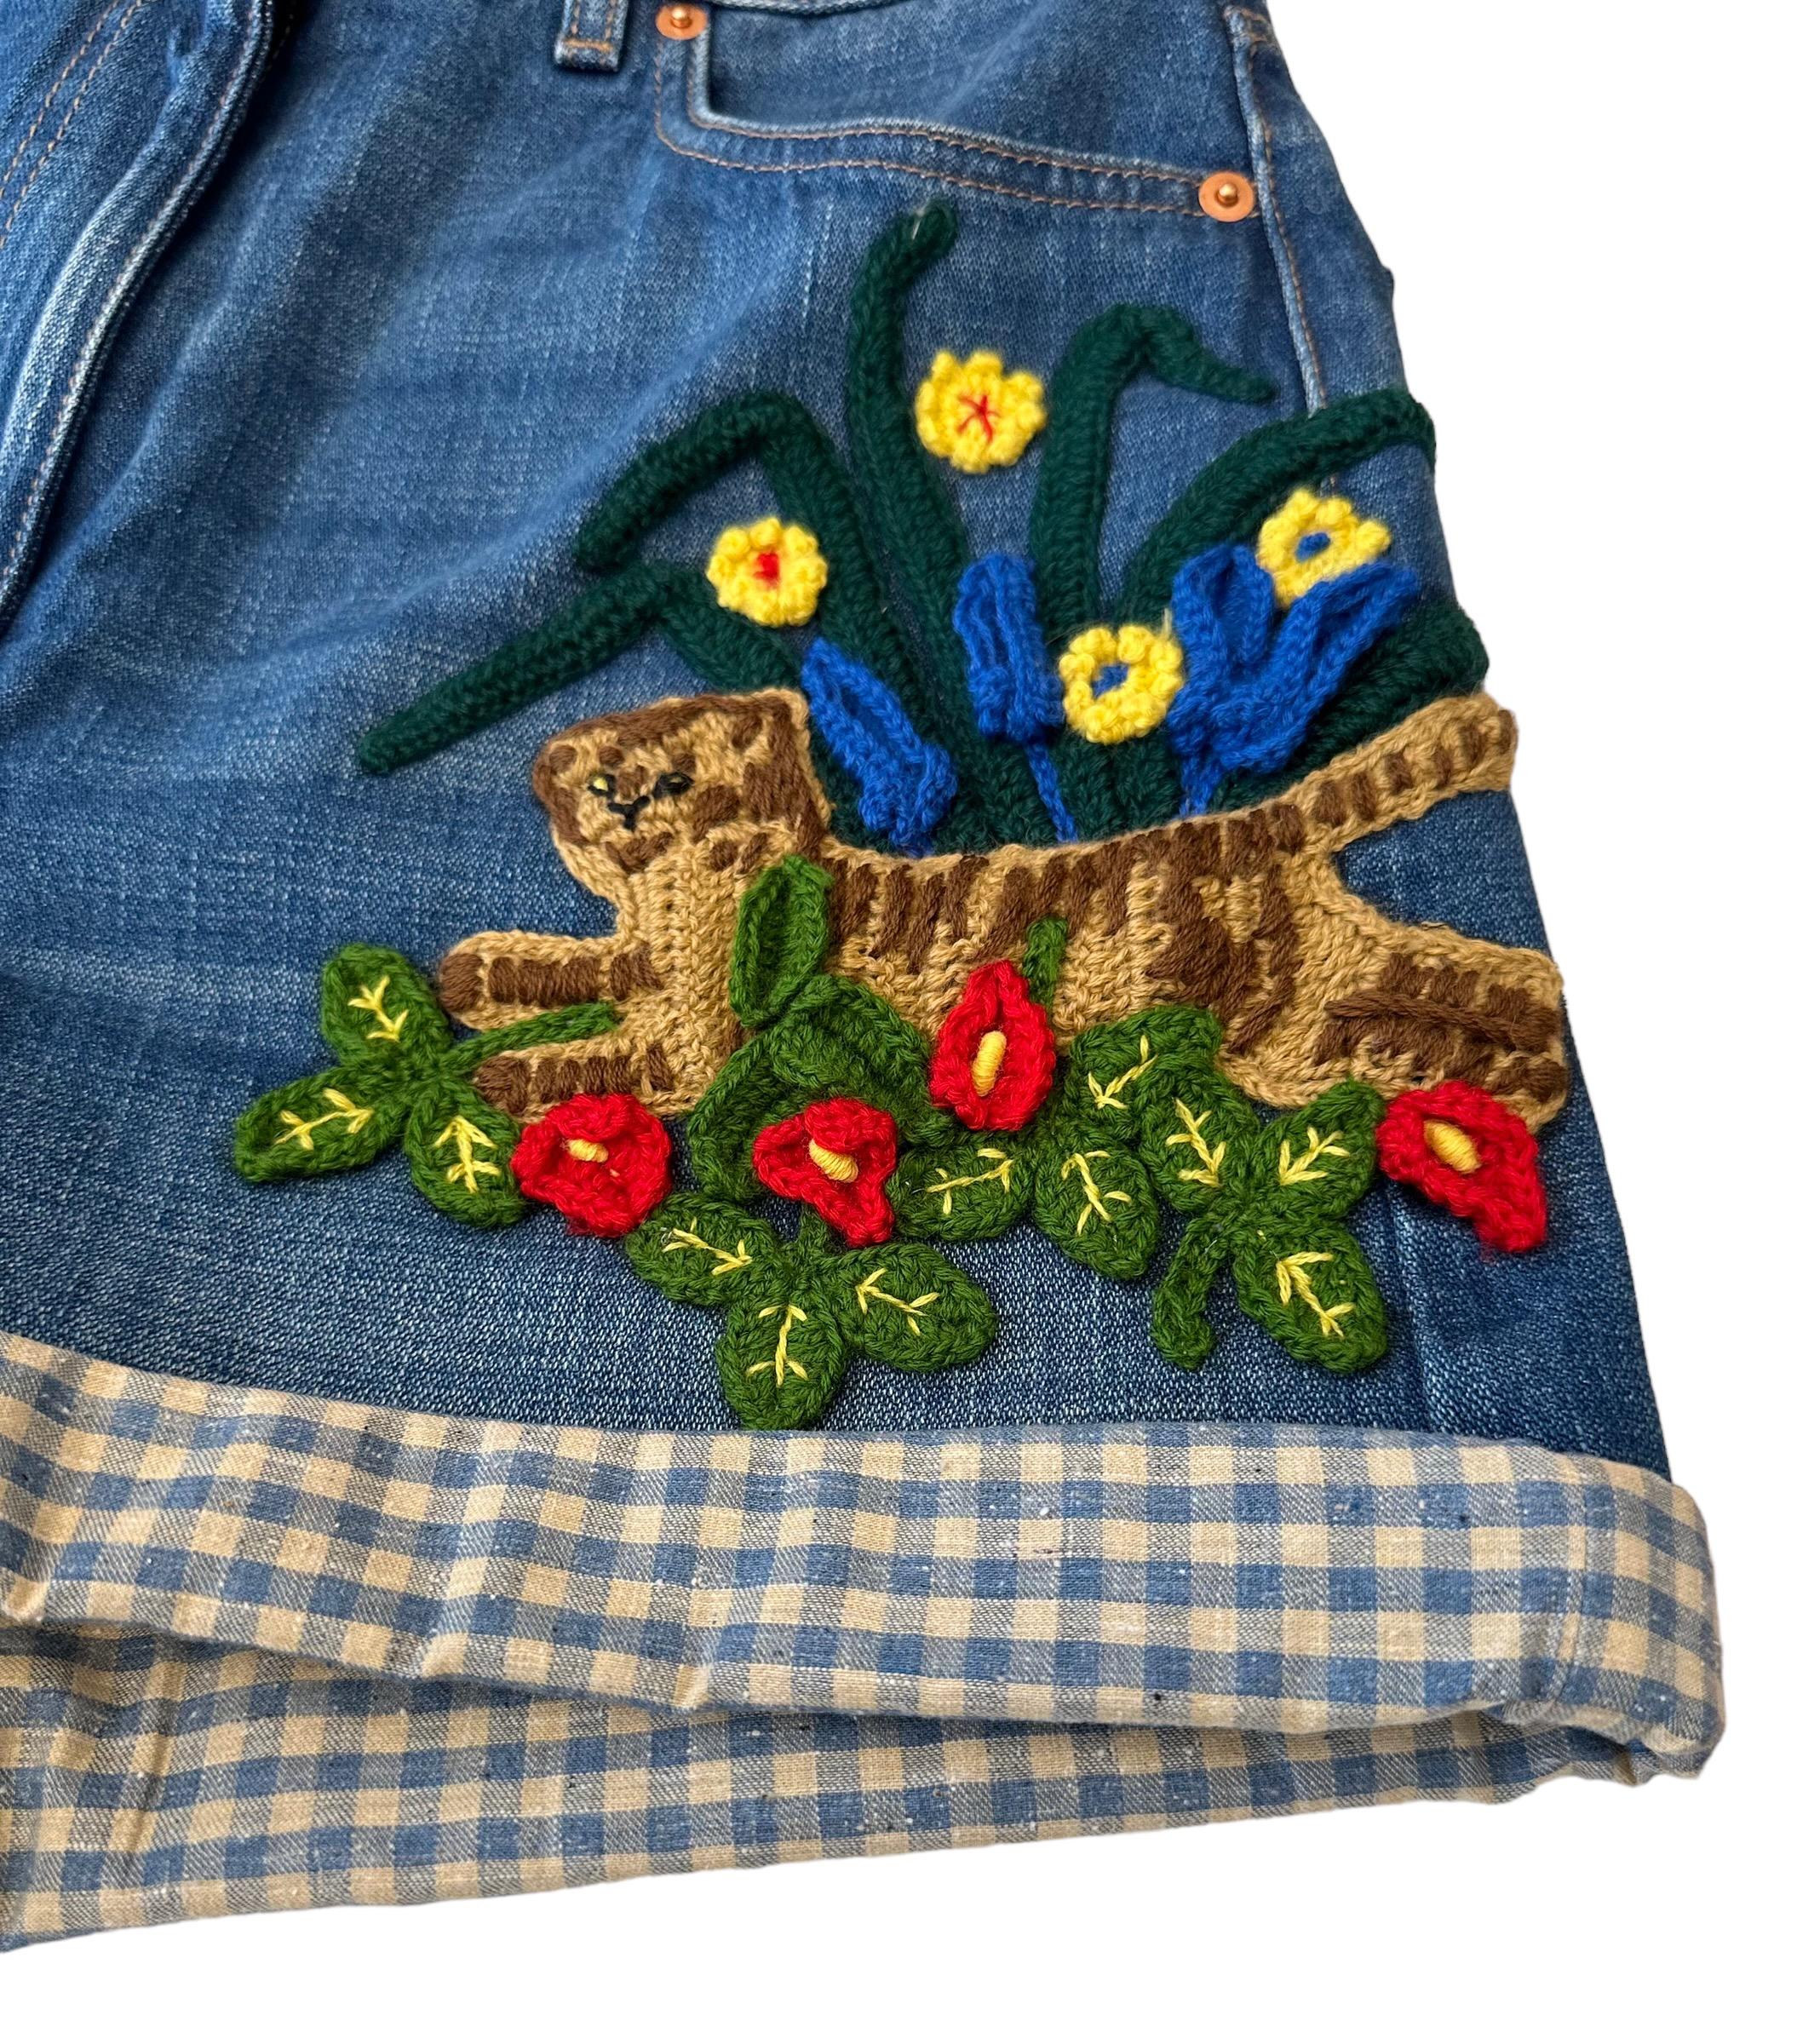 This pre-owned pair of denim shorts from the house of Gucci is a five pockets style. It is high waisted with a zip and button closure.
It features a Tiger and flower embroidery in the front and a metallic Gucci vintage logo label at the